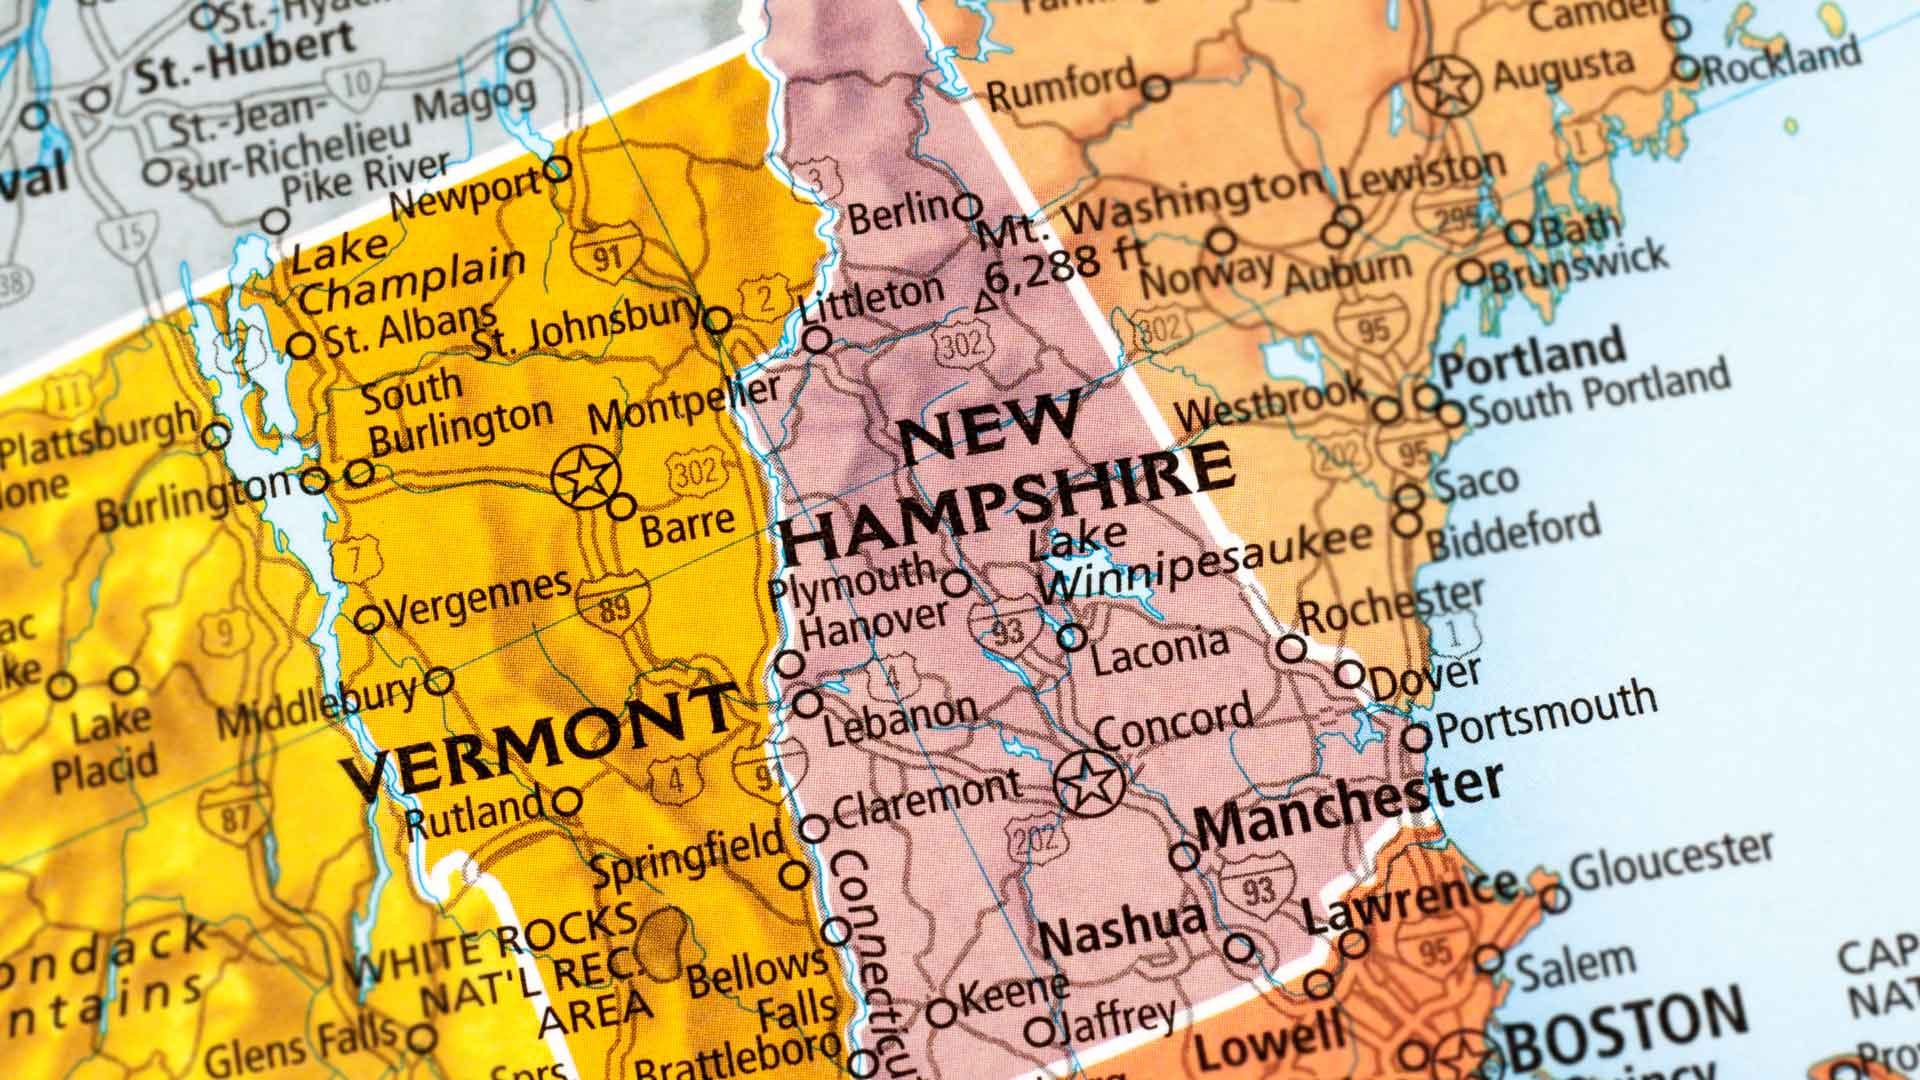 Best Cities To Live In New Hampshire - www.inf-inet.com